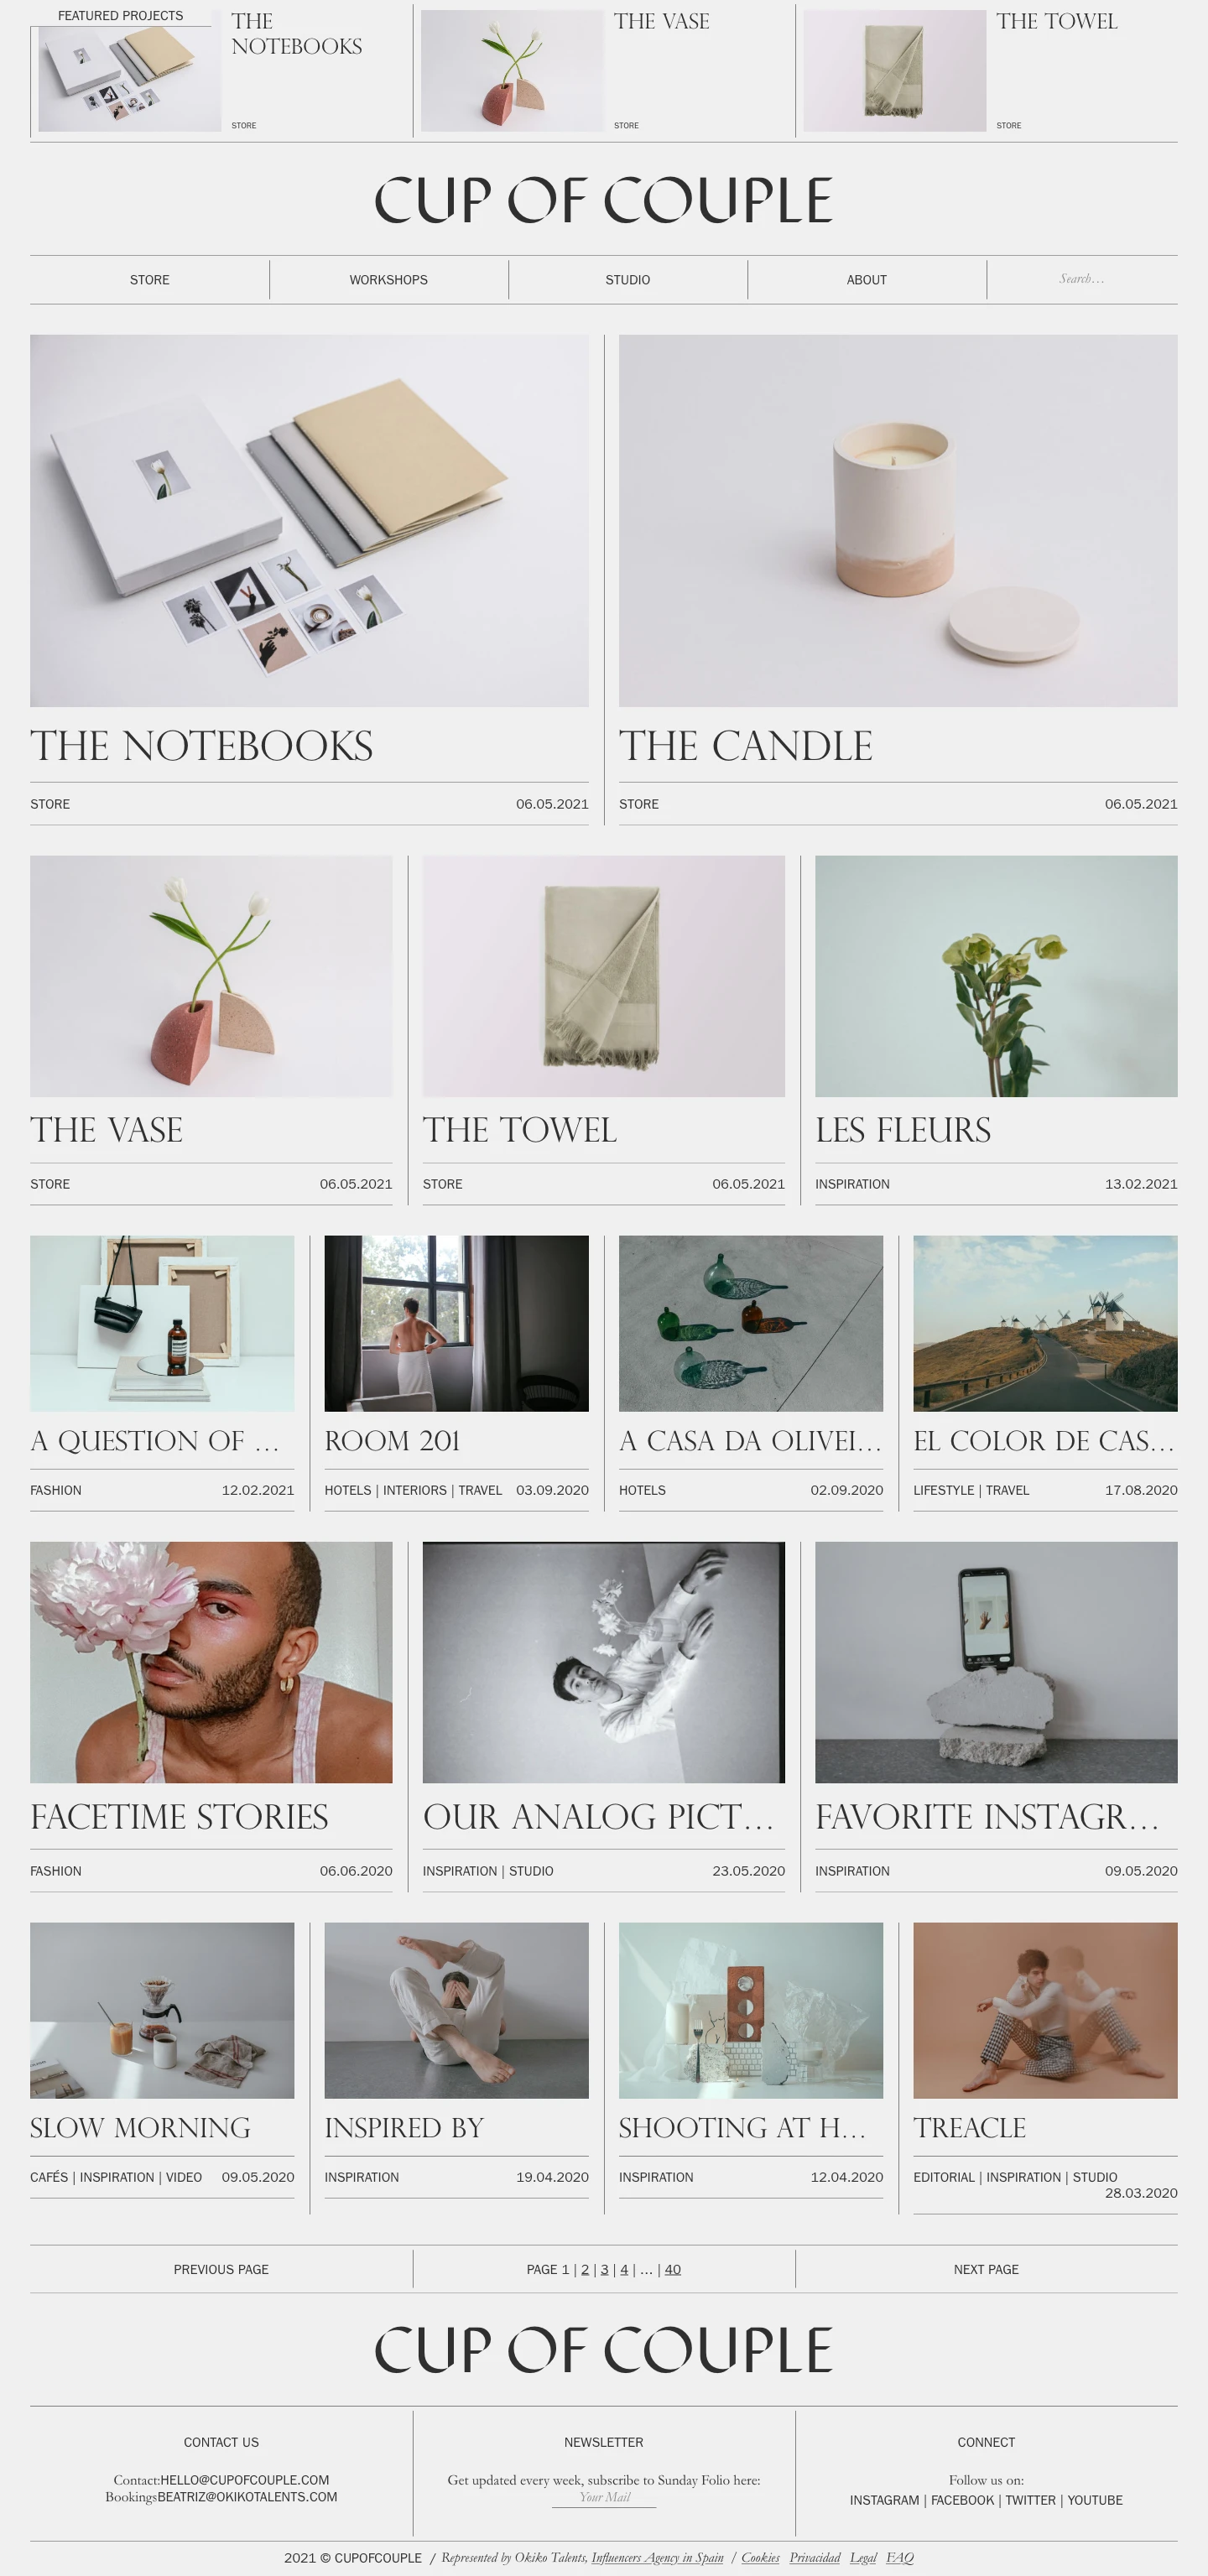 Cup of Couple Landing Page Example: Fashion and lifestyle inspiration for creative and curious minds. Curated by Mike Madrid & Gabriel García.